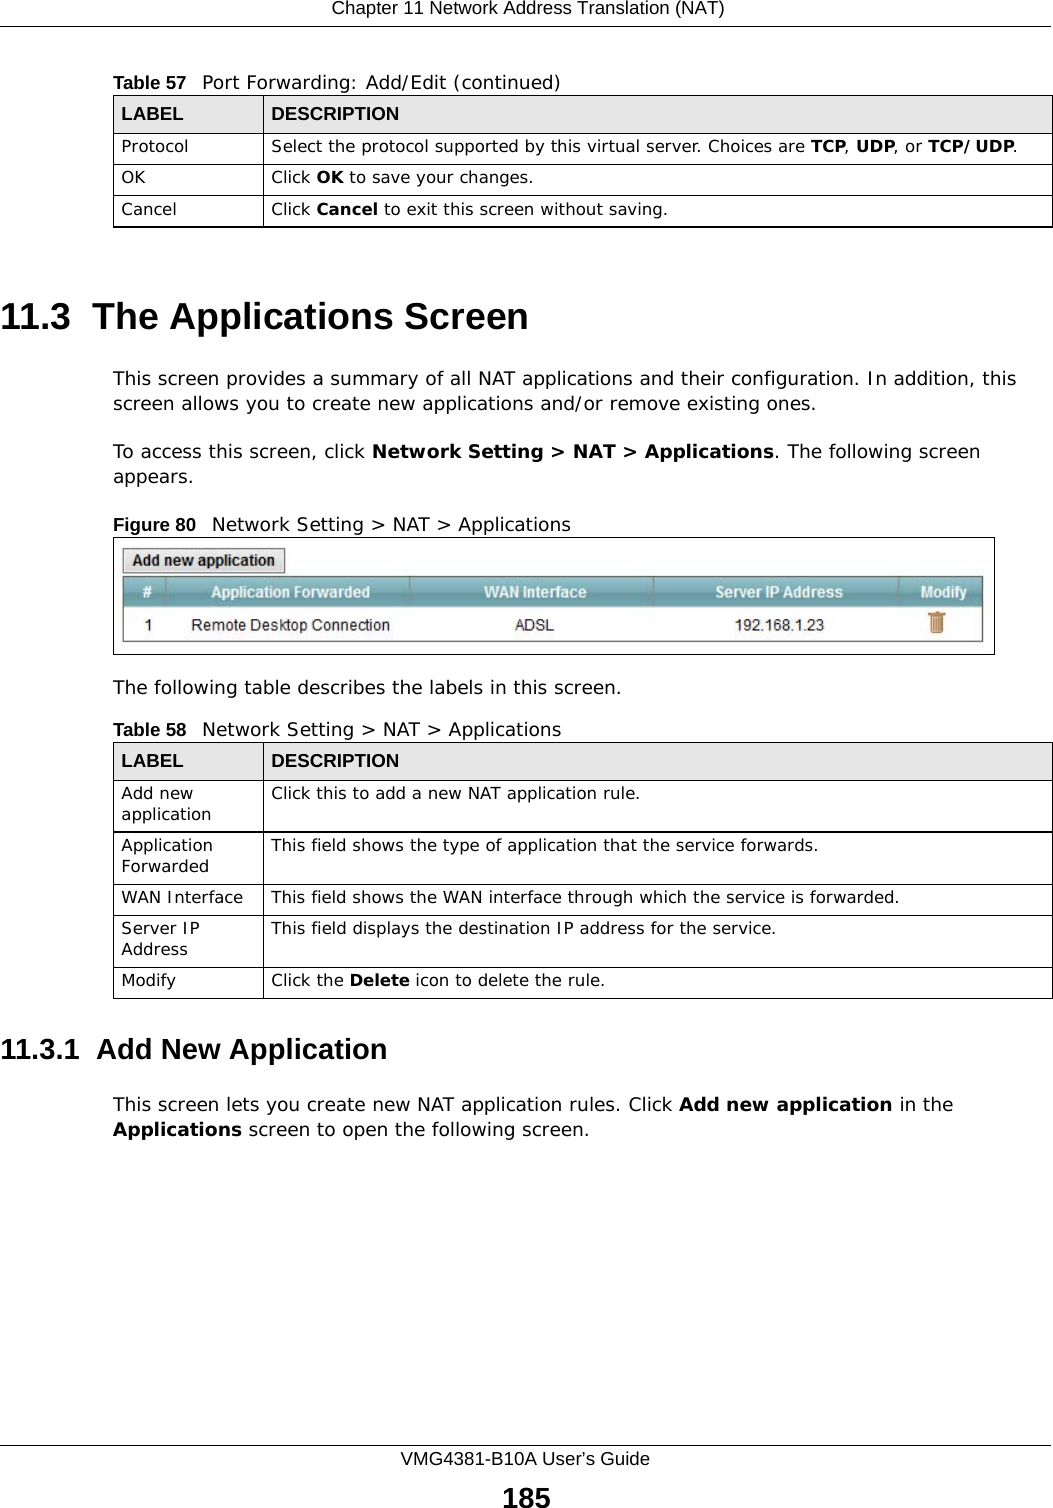  Chapter 11 Network Address Translation (NAT)VMG4381-B10A User’s Guide18511.3  The Applications ScreenThis screen provides a summary of all NAT applications and their configuration. In addition, this screen allows you to create new applications and/or remove existing ones.To access this screen, click Network Setting &gt; NAT &gt; Applications. The following screen appears.Figure 80   Network Setting &gt; NAT &gt; ApplicationsThe following table describes the labels in this screen. 11.3.1  Add New ApplicationThis screen lets you create new NAT application rules. Click Add new application in the Applications screen to open the following screen.Protocol Select the protocol supported by this virtual server. Choices are TCP, UDP, or TCP/UDP.OK Click OK to save your changes.Cancel Click Cancel to exit this screen without saving.Table 57   Port Forwarding: Add/Edit (continued)LABEL DESCRIPTIONTable 58   Network Setting &gt; NAT &gt; ApplicationsLABEL DESCRIPTIONAdd new application Click this to add a new NAT application rule.Application Forwarded This field shows the type of application that the service forwards.WAN Interface This field shows the WAN interface through which the service is forwarded.Server IP Address This field displays the destination IP address for the service.Modify Click the Delete icon to delete the rule.